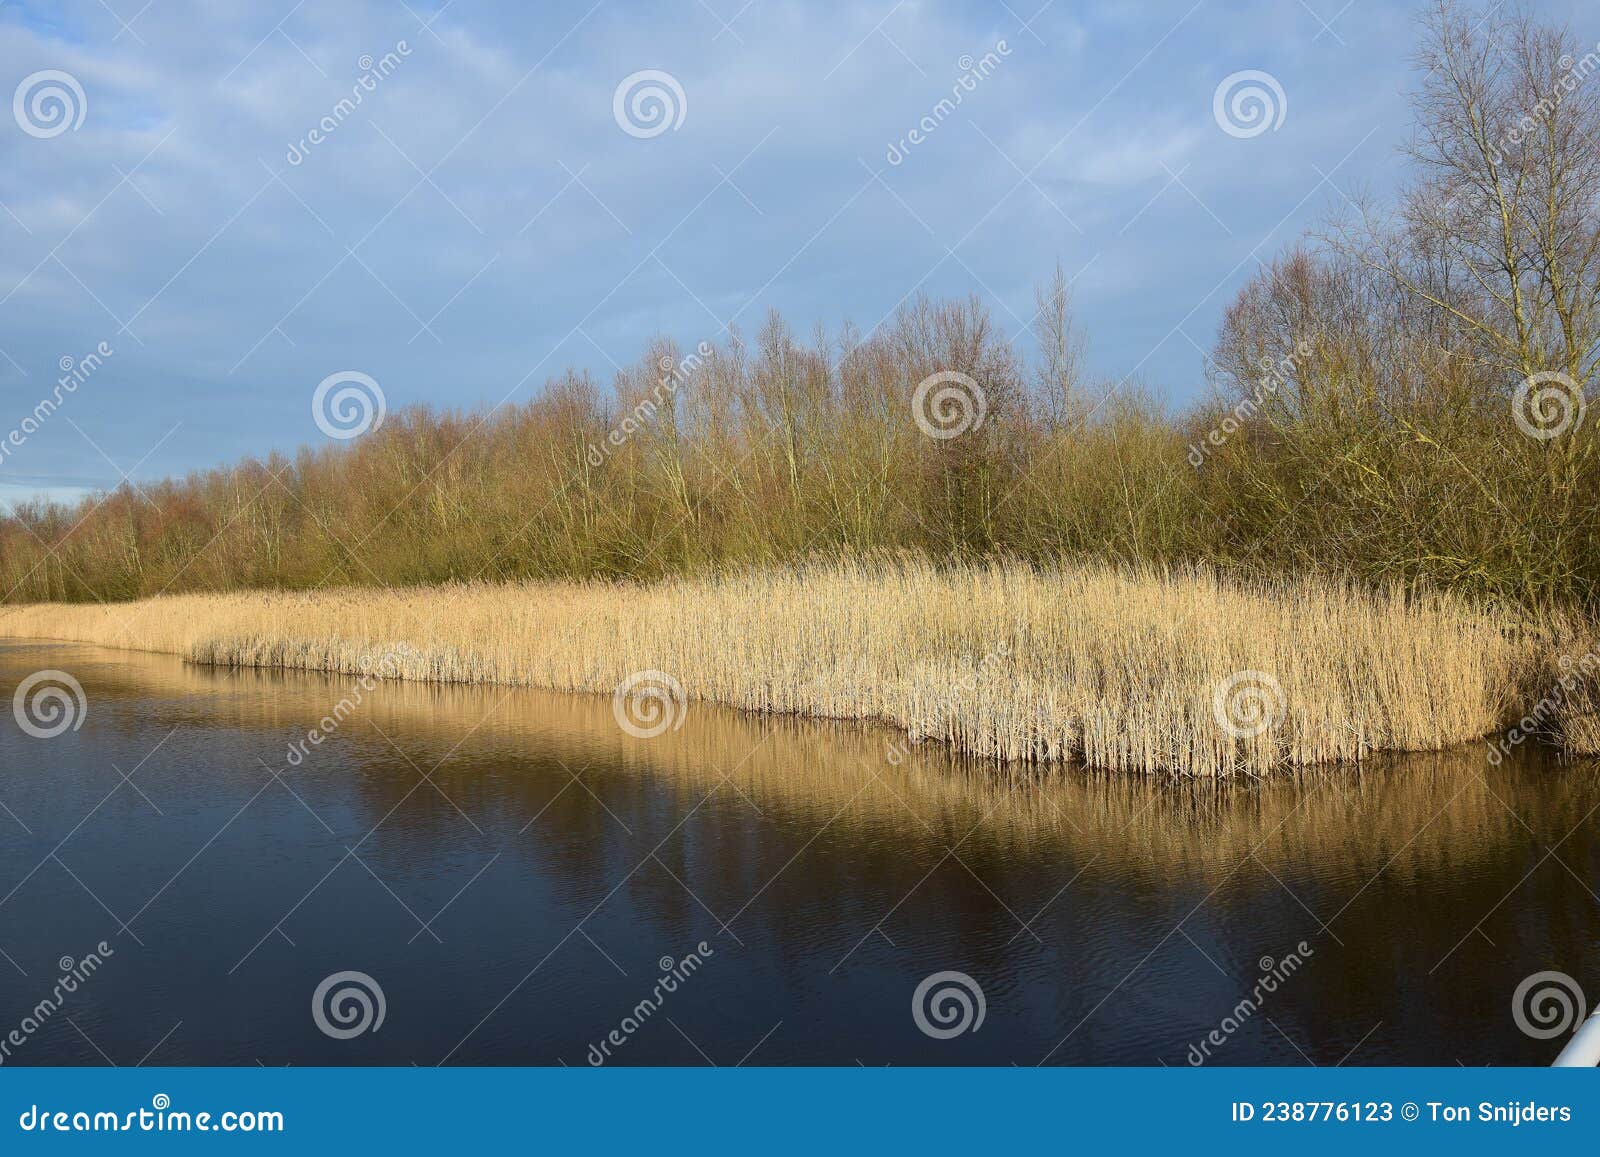 reeds can form entire collars along waterfronts. it is a plant that really blows with all winds.